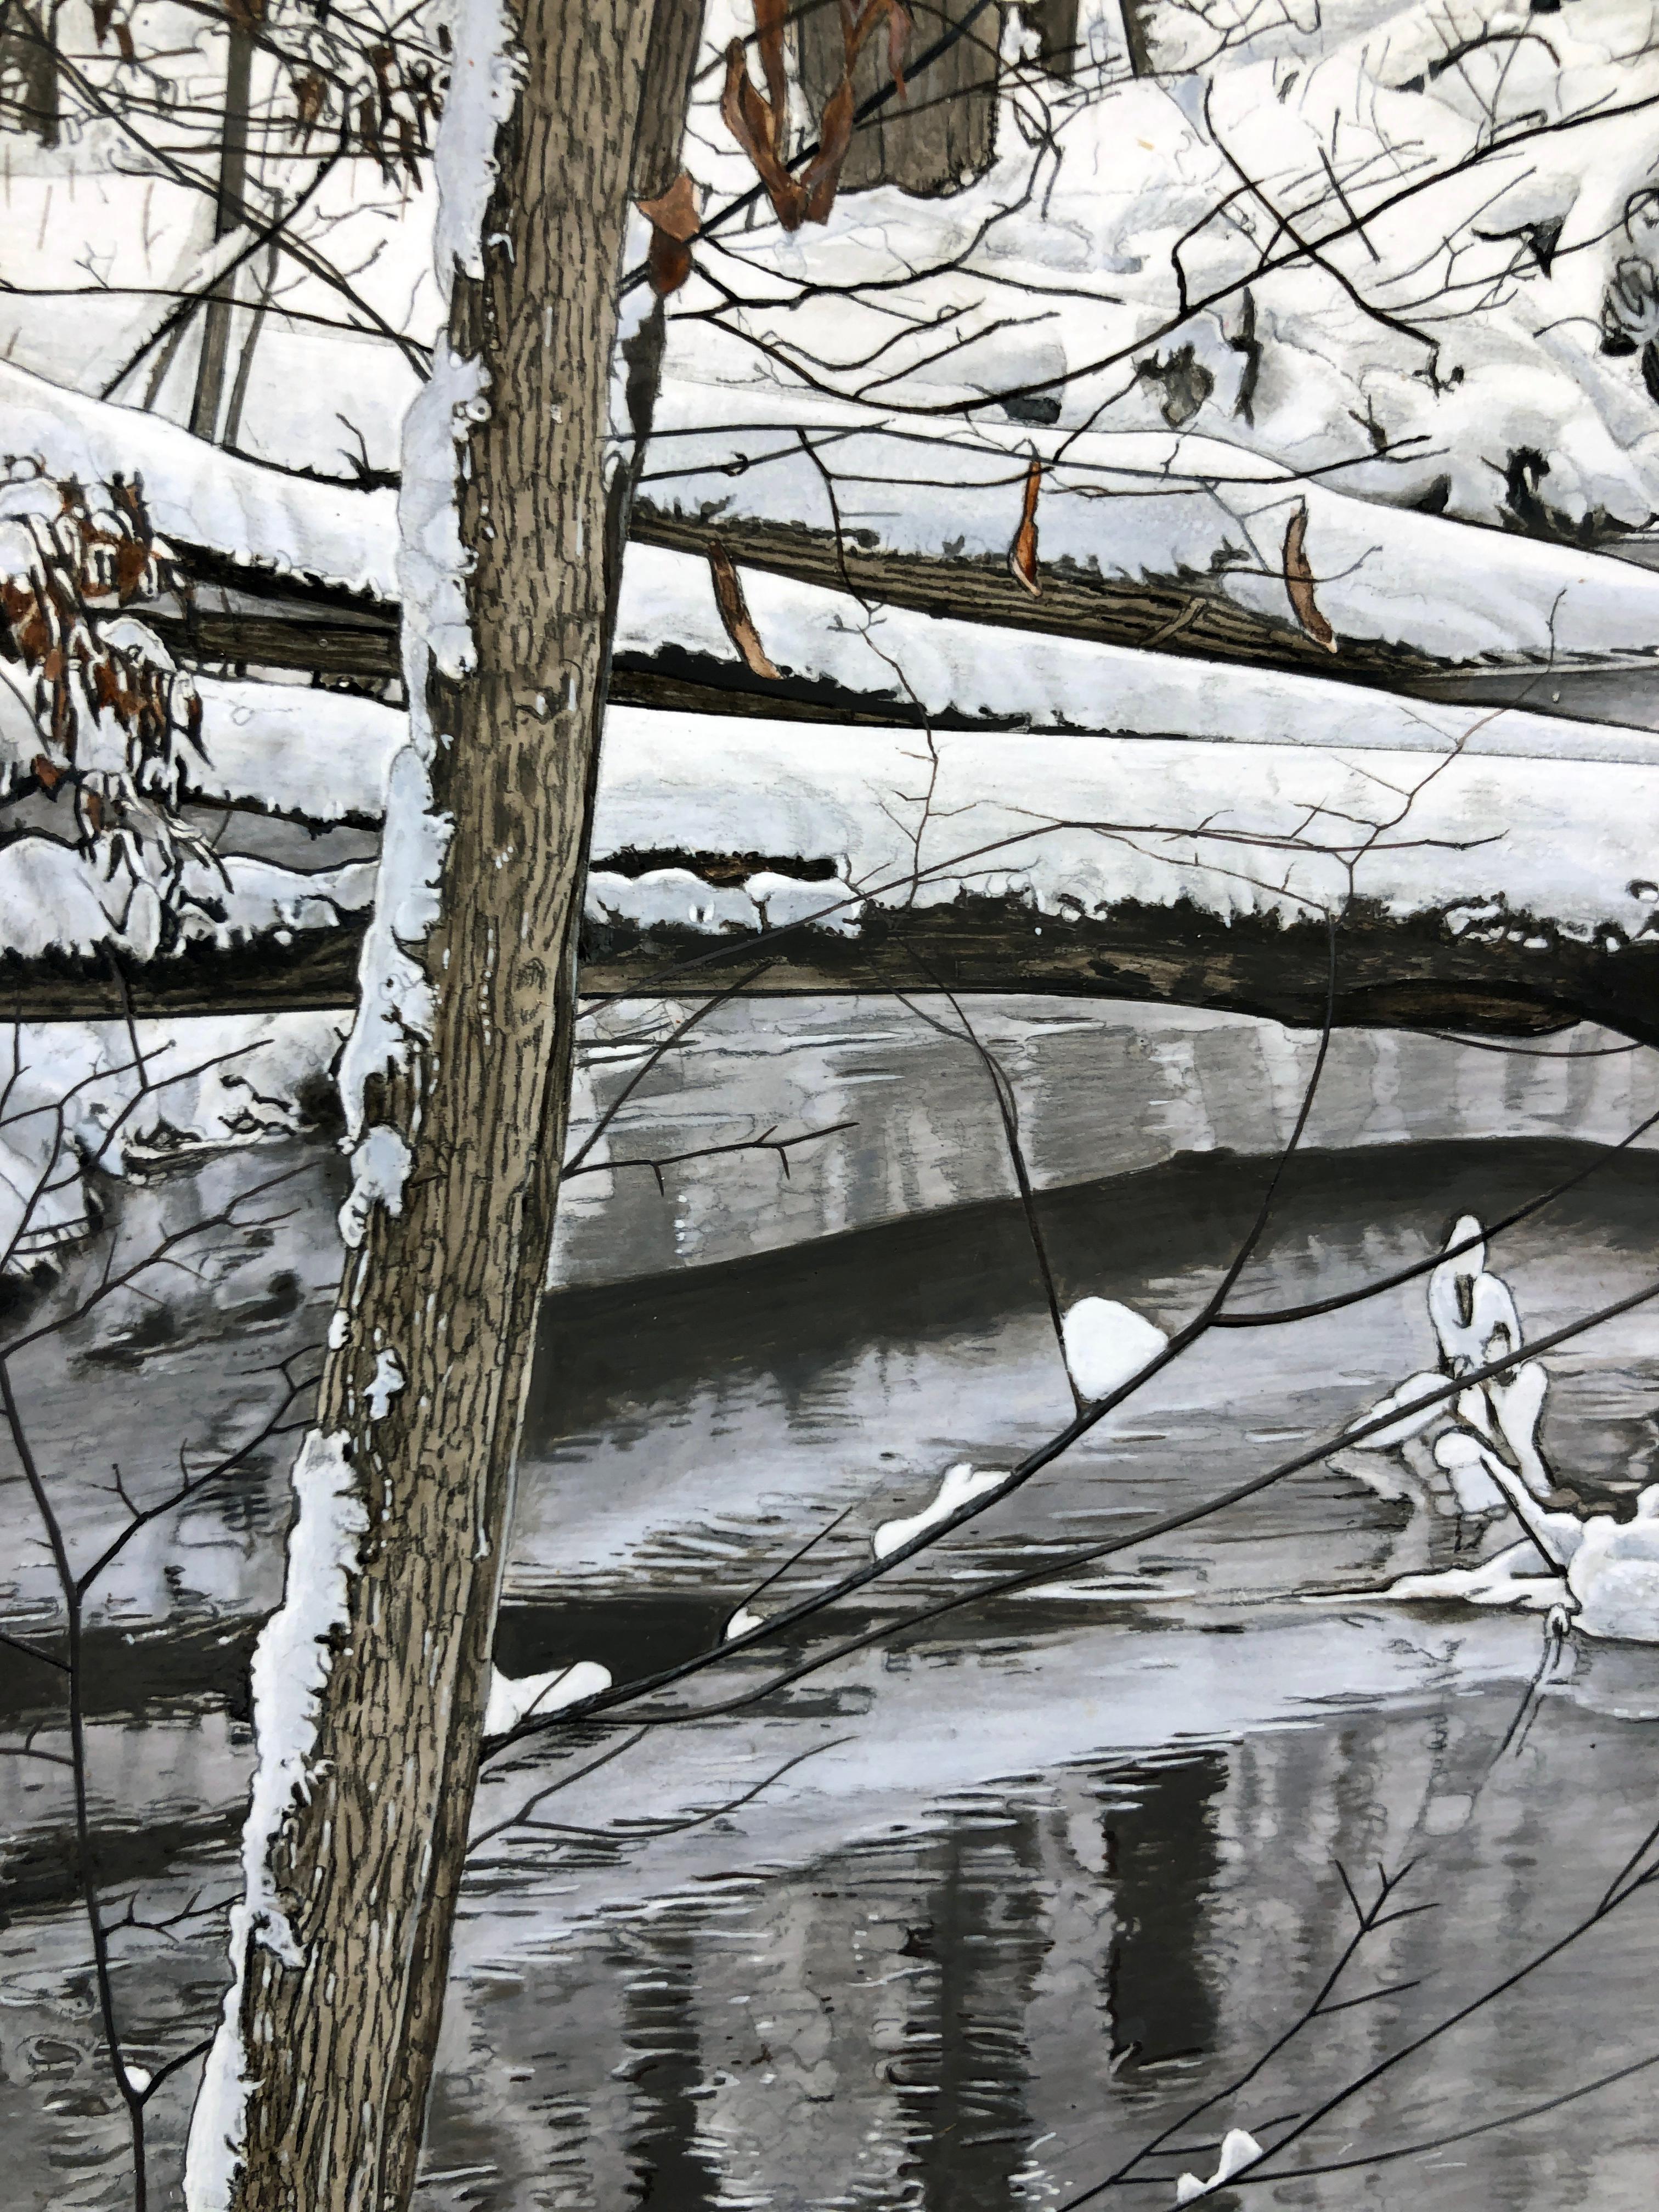 Chickadee at Hasler Creek - Photorealistic Painting of Bird in a Winter Scene 3